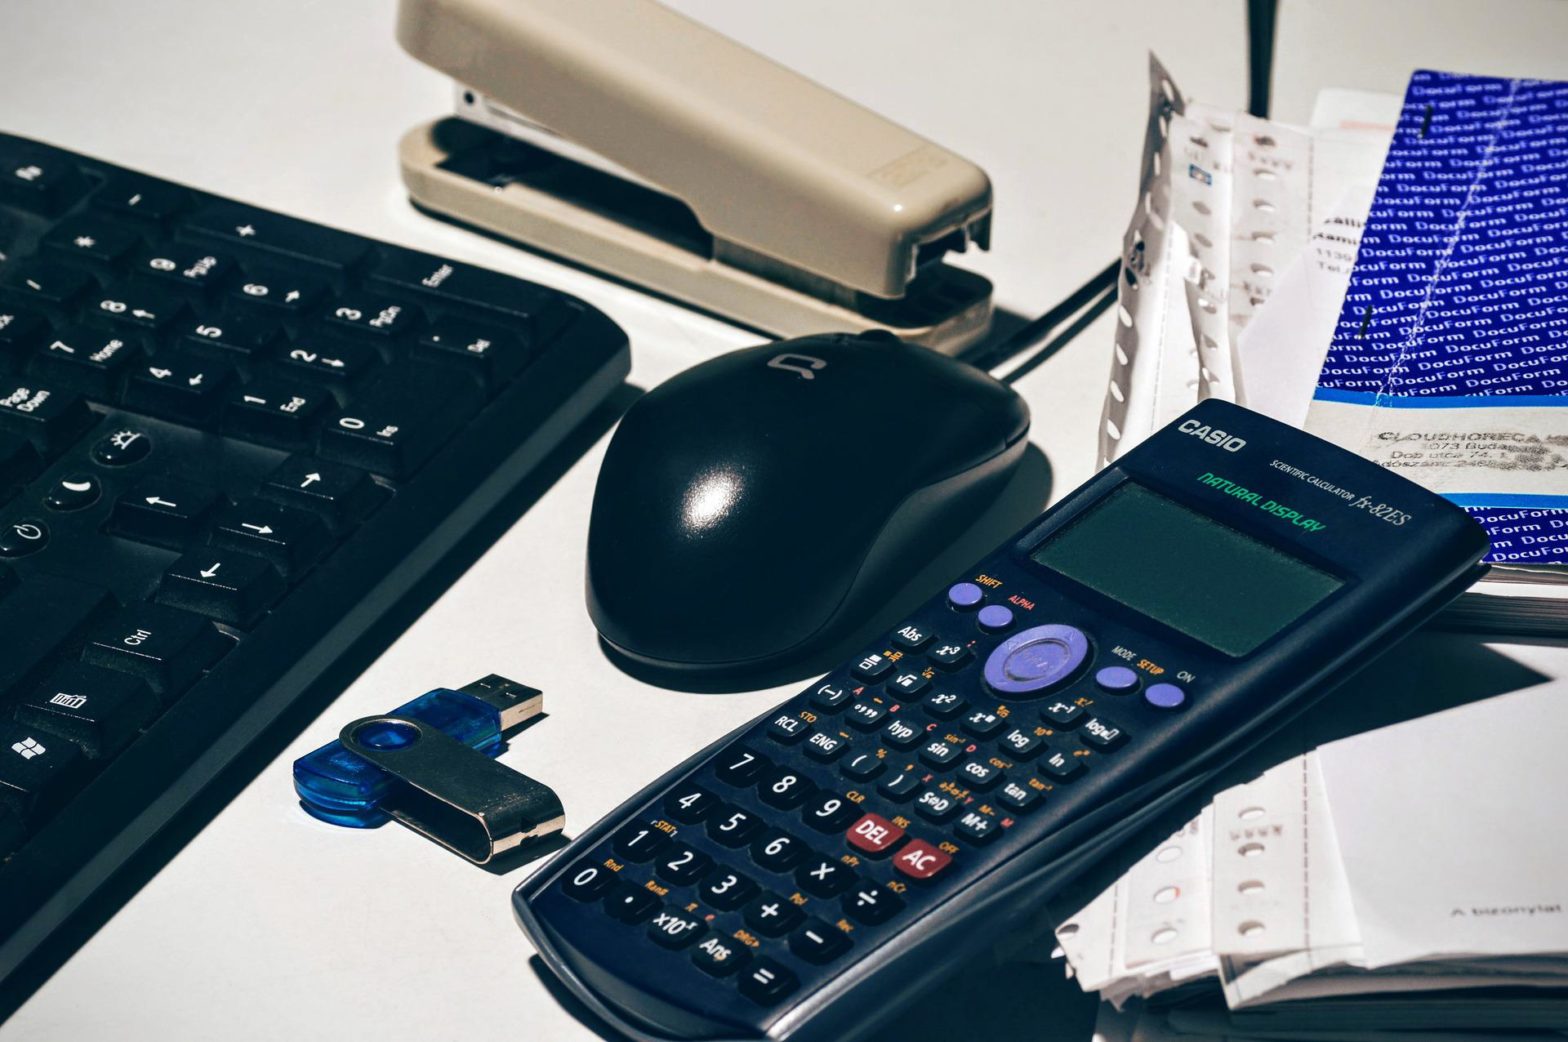 A calculator next to a computer mouse and keyboard, and stapler.